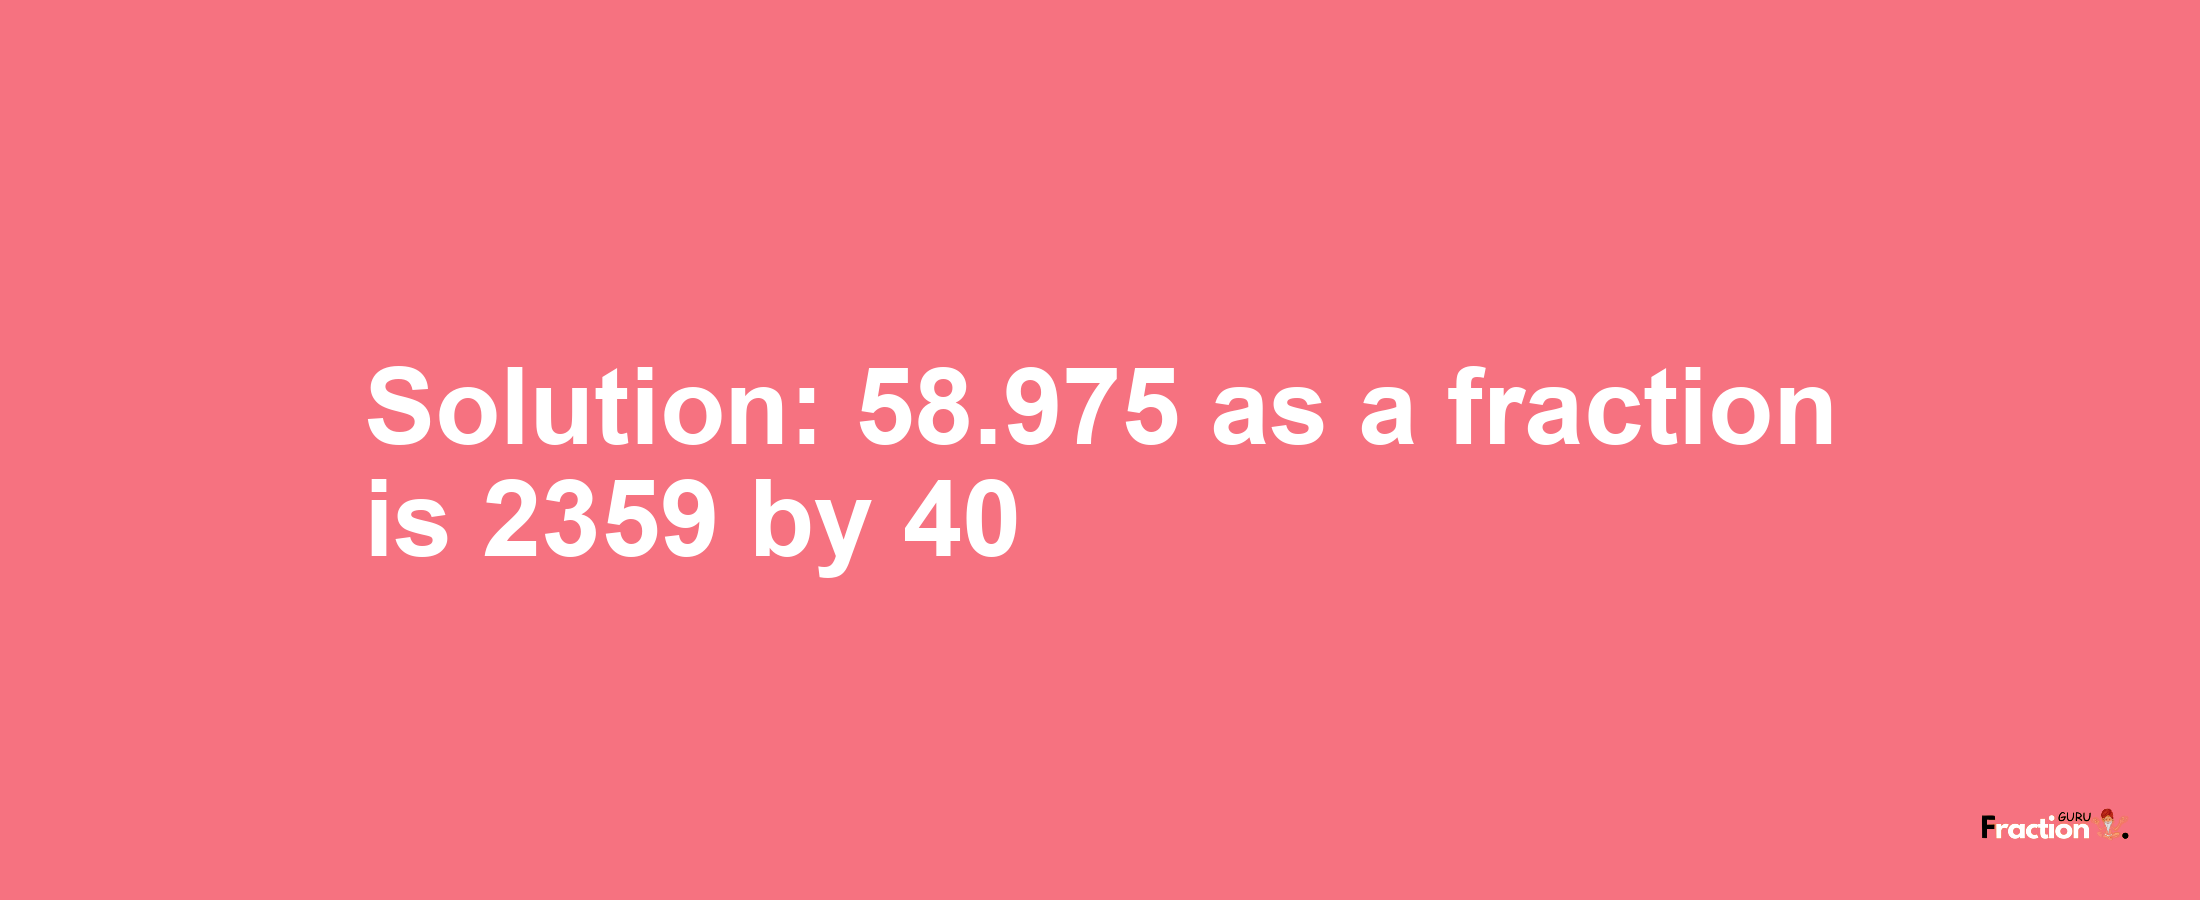 Solution:58.975 as a fraction is 2359/40